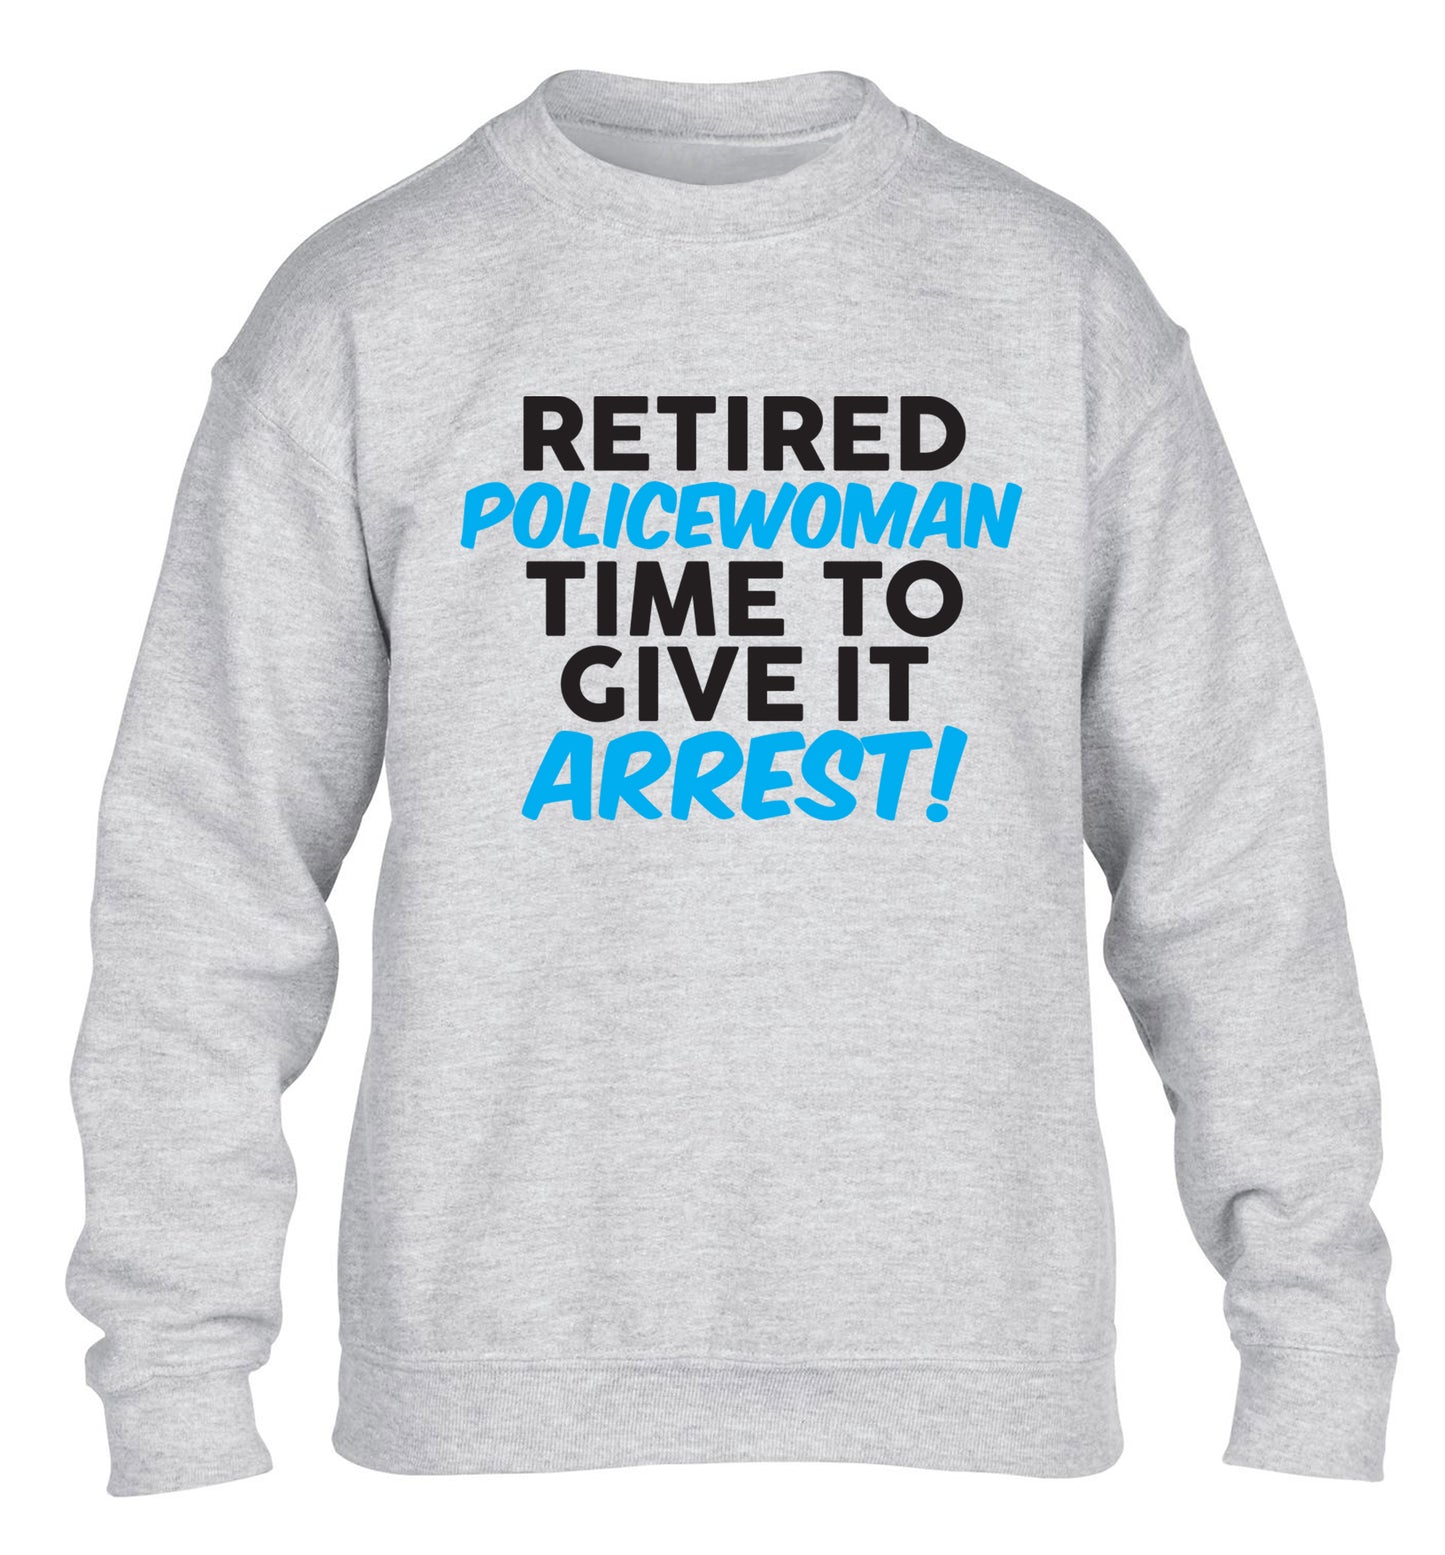 Retired policewoman time to give it arrest children's grey sweater 12-13 Years